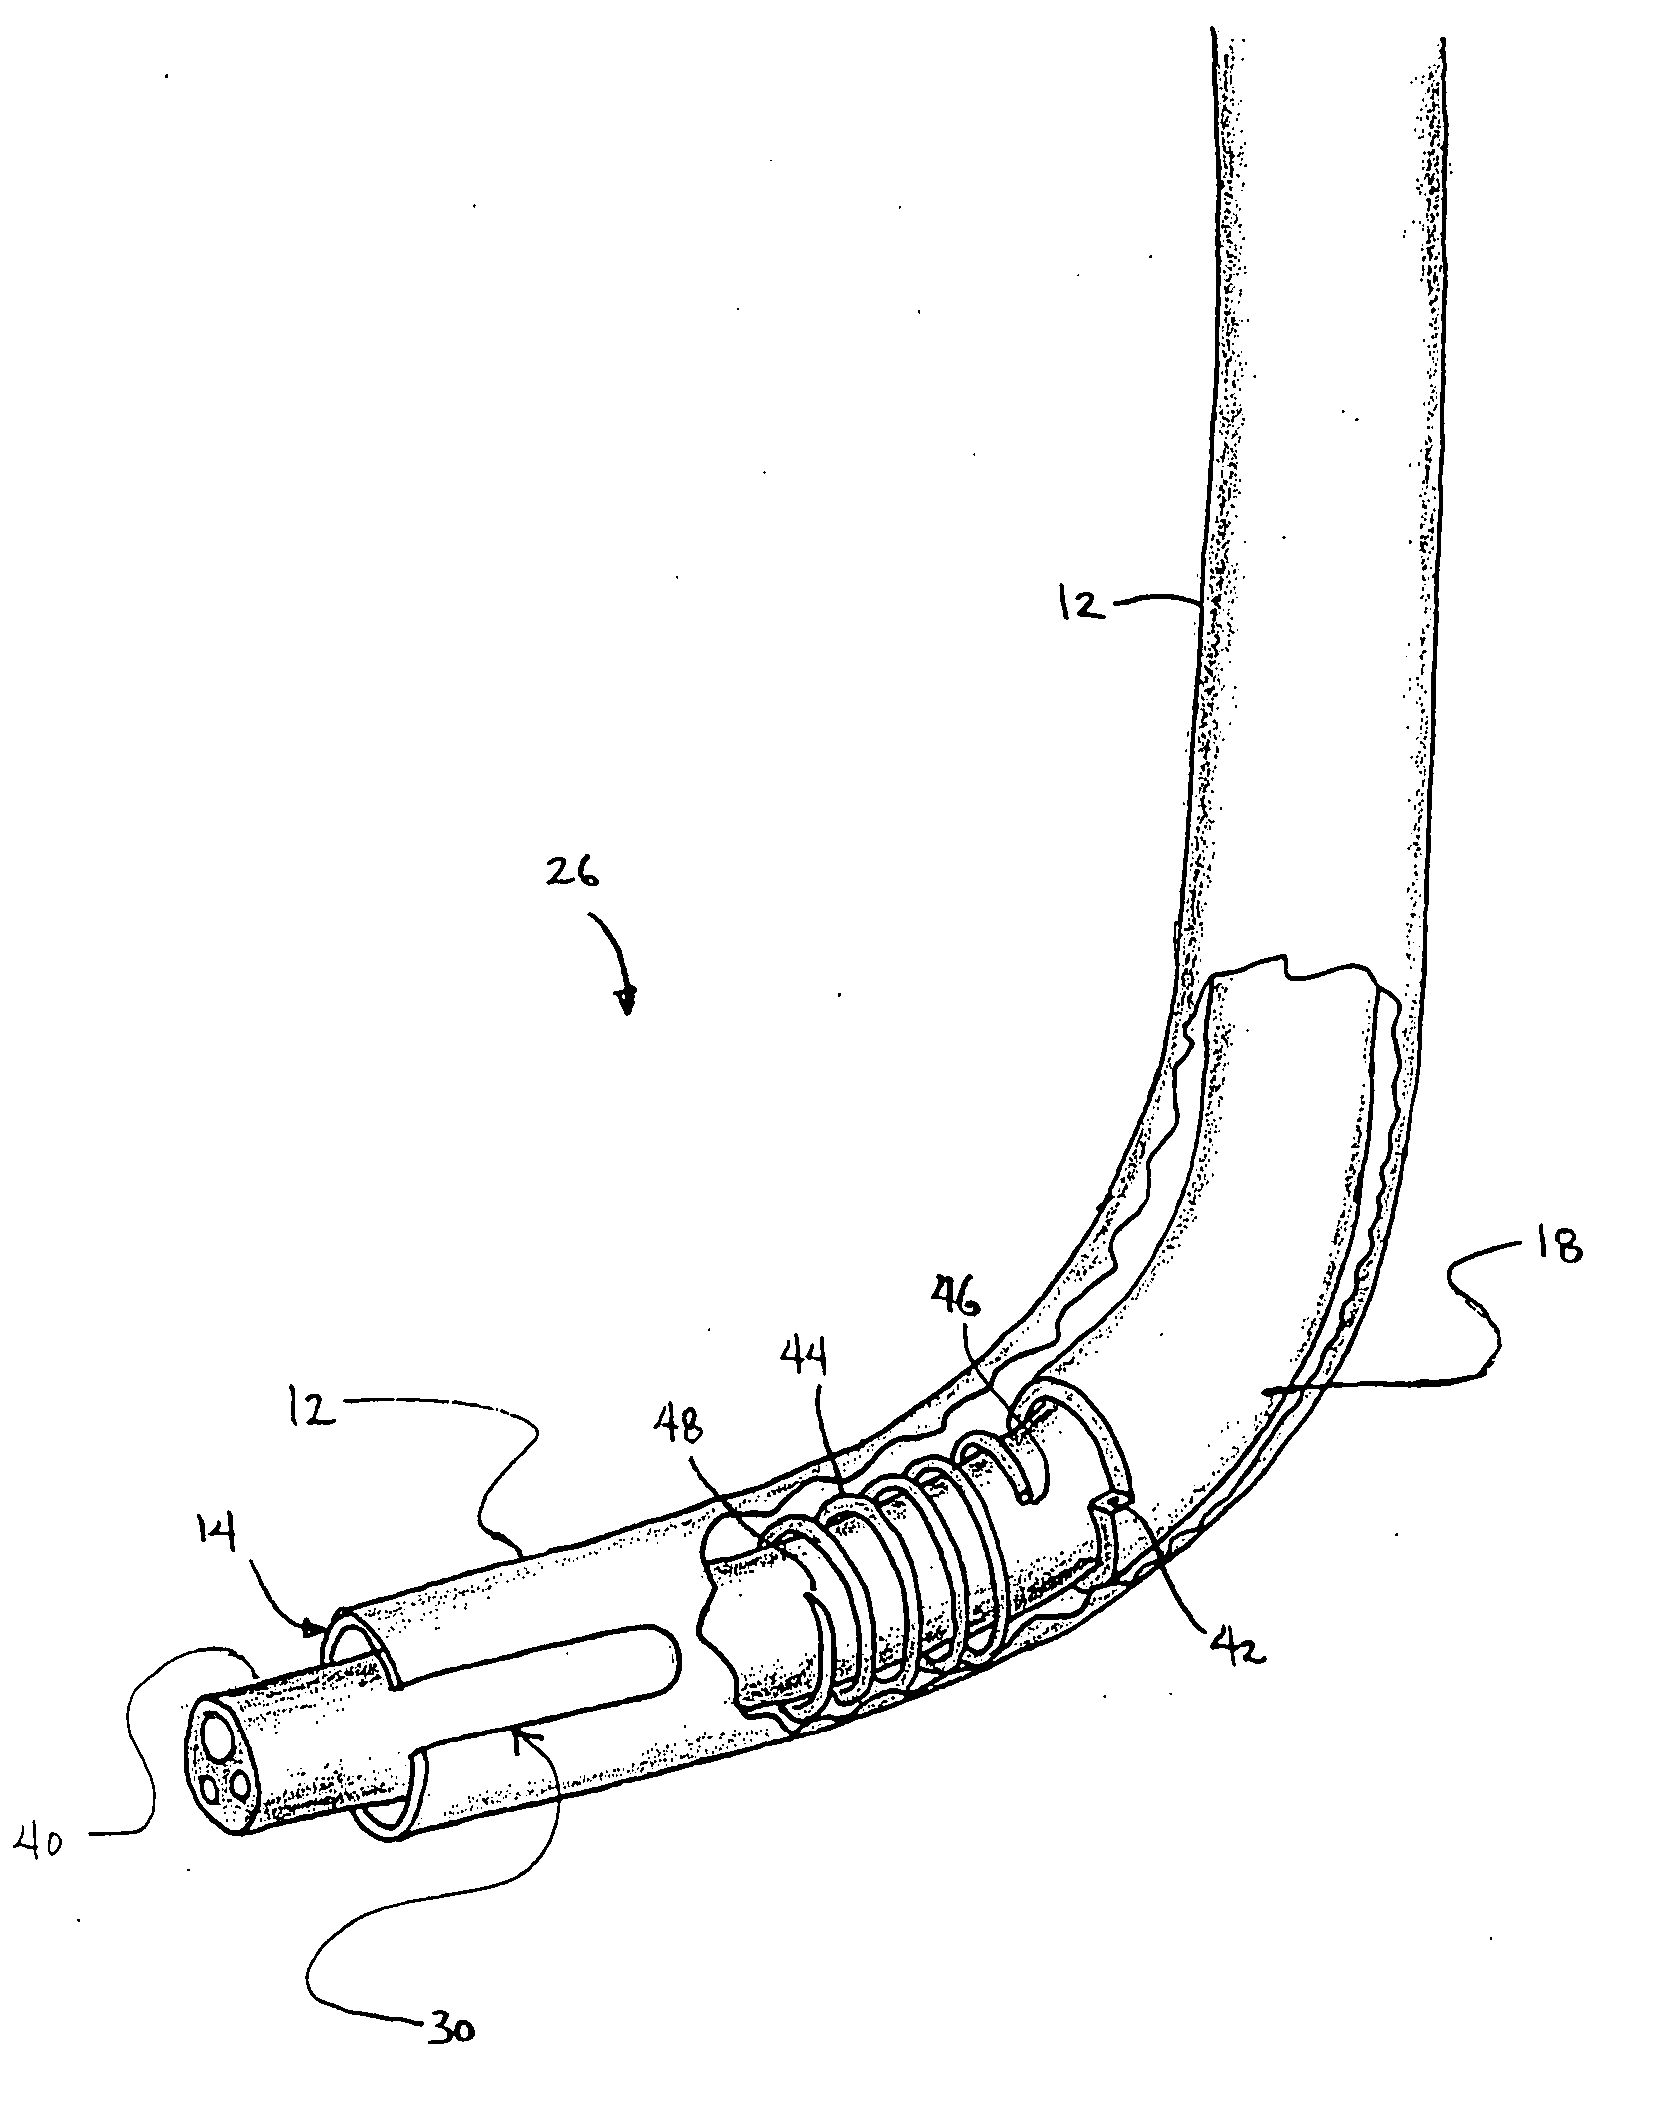 Overtube apparatus for insertion into a body